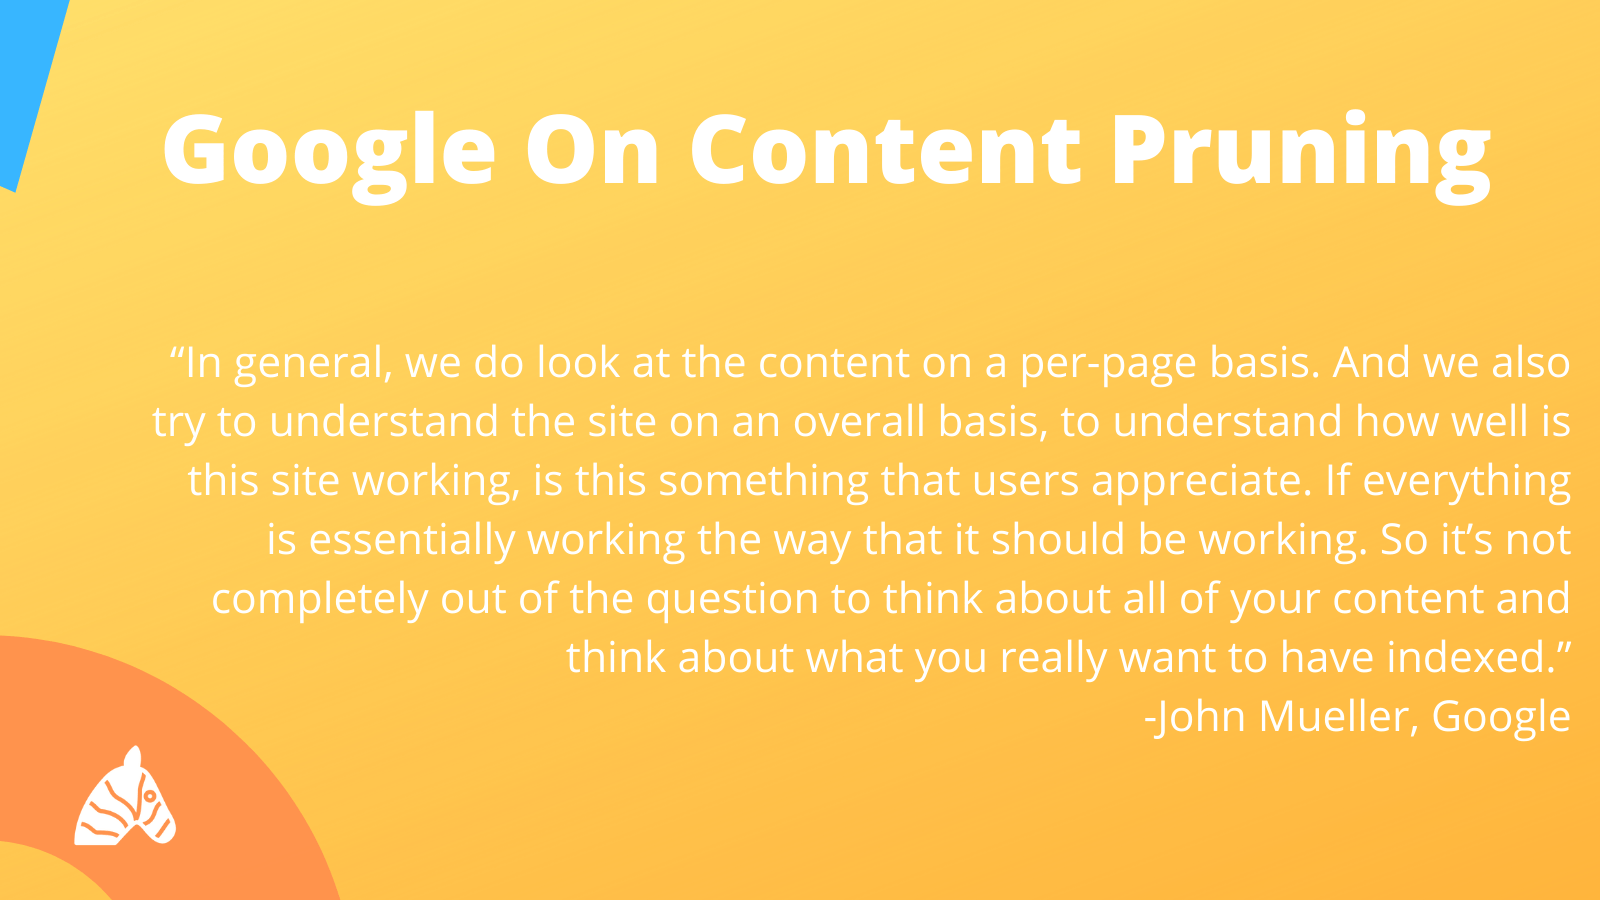 Google on Content Pruning in the context of SEO